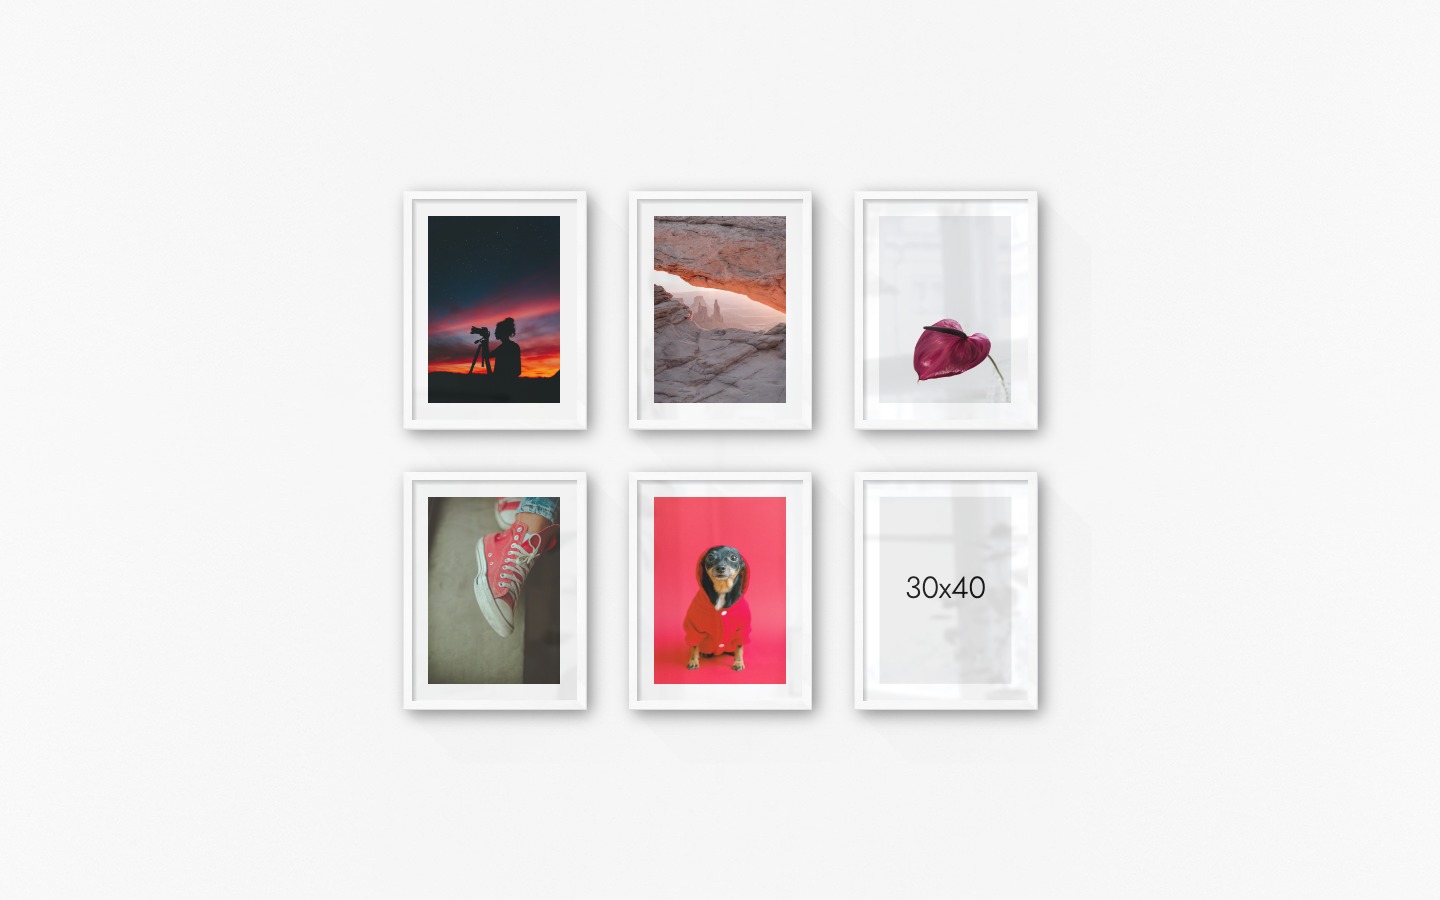 Gallery wall with picture frames in white in sizes 30x40 with prints "Photographer at night", "View between cliffs", "Red flower", "Red shoes" and "Dog in red sweater"